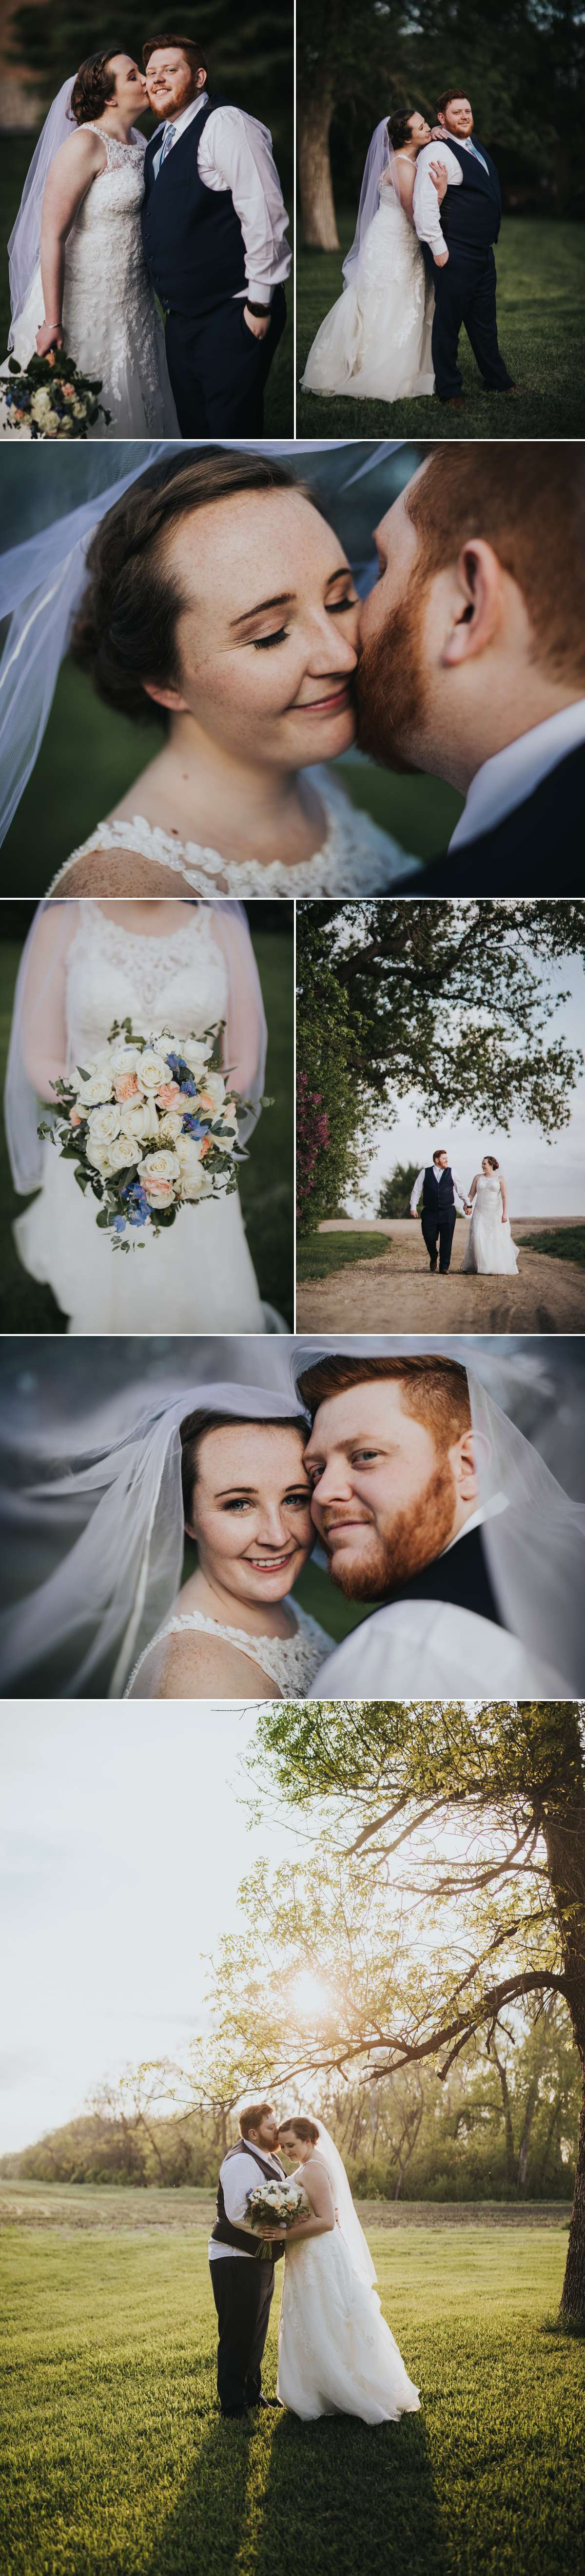 Sunset Bride and Groom couple portraits at Romantic Moon Event Center